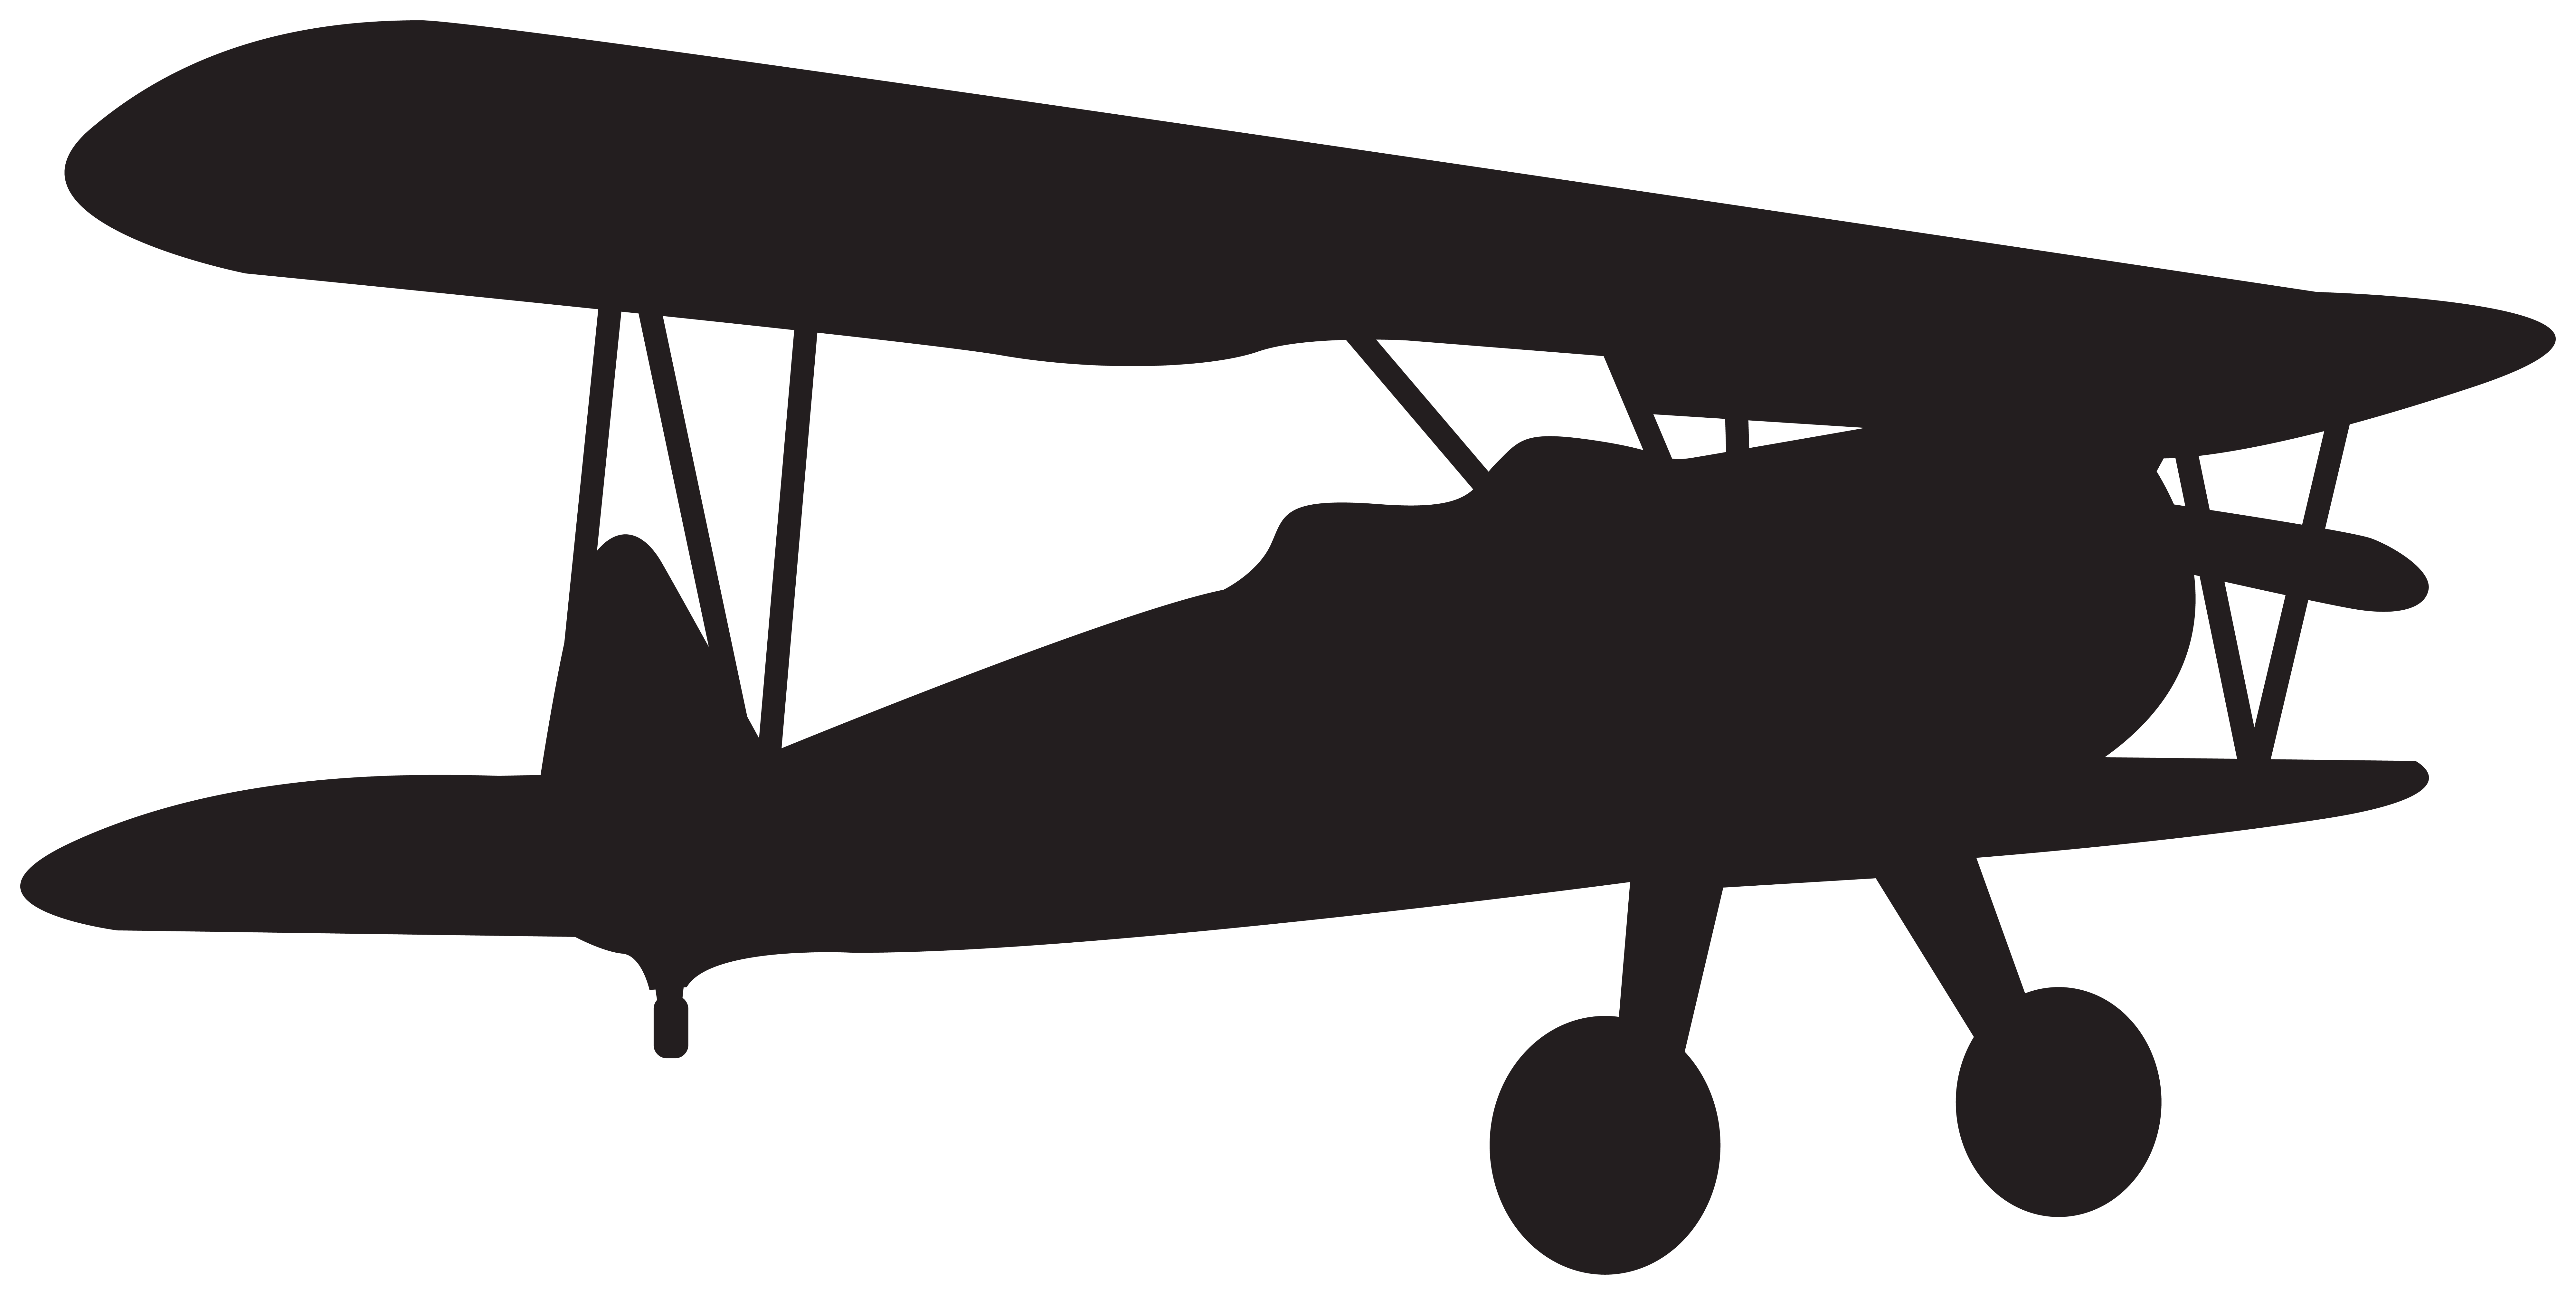 Small Plane Silhouette Clip Art Image | Gallery Yopriceville 